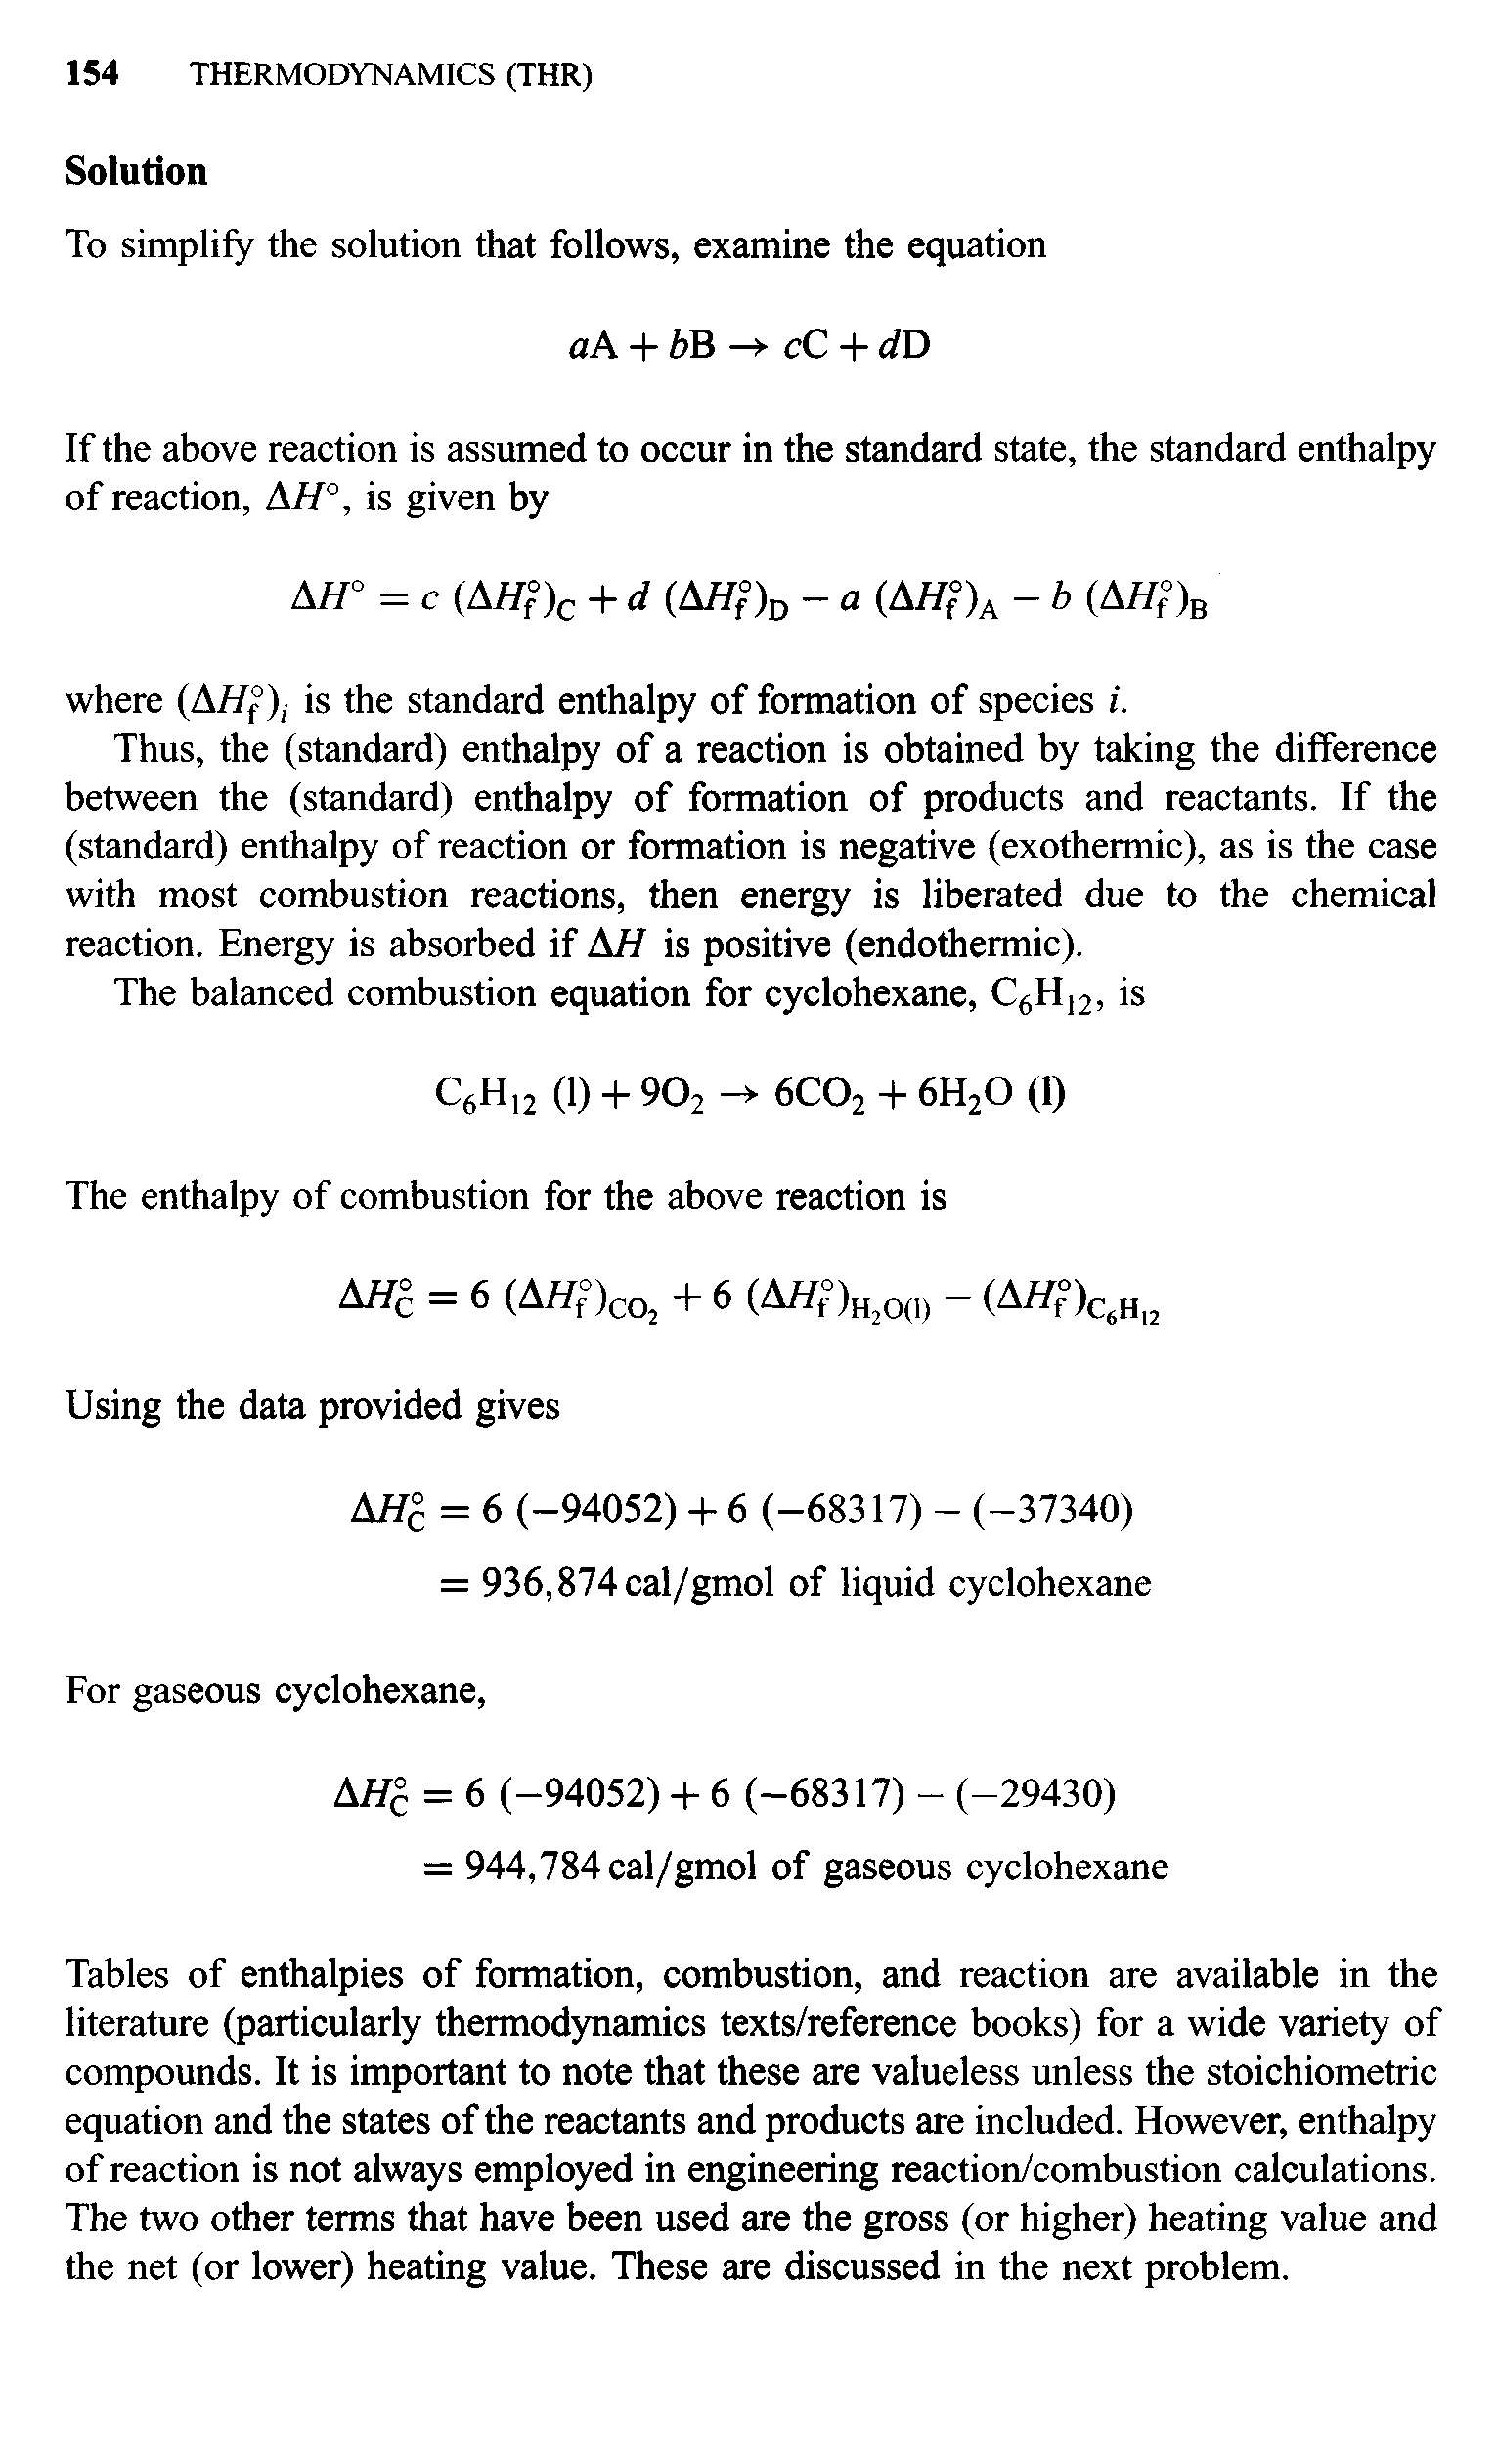 Tables of enthalpies of formation, combustion, and reaction are available in the literature (particularly thermodynamics texts/reference books) for a wide variety of compounds. It is important to note that these are valueless unless the stoichiometric equation and the states of the reactants and products are included. However, enthalpy of reaction is not always employed in engineering reaction/combustion calculations. The two other terms that have been used are the gross (or higher) heating value and the net (or lower) heating value. These are discussed in the next problem.